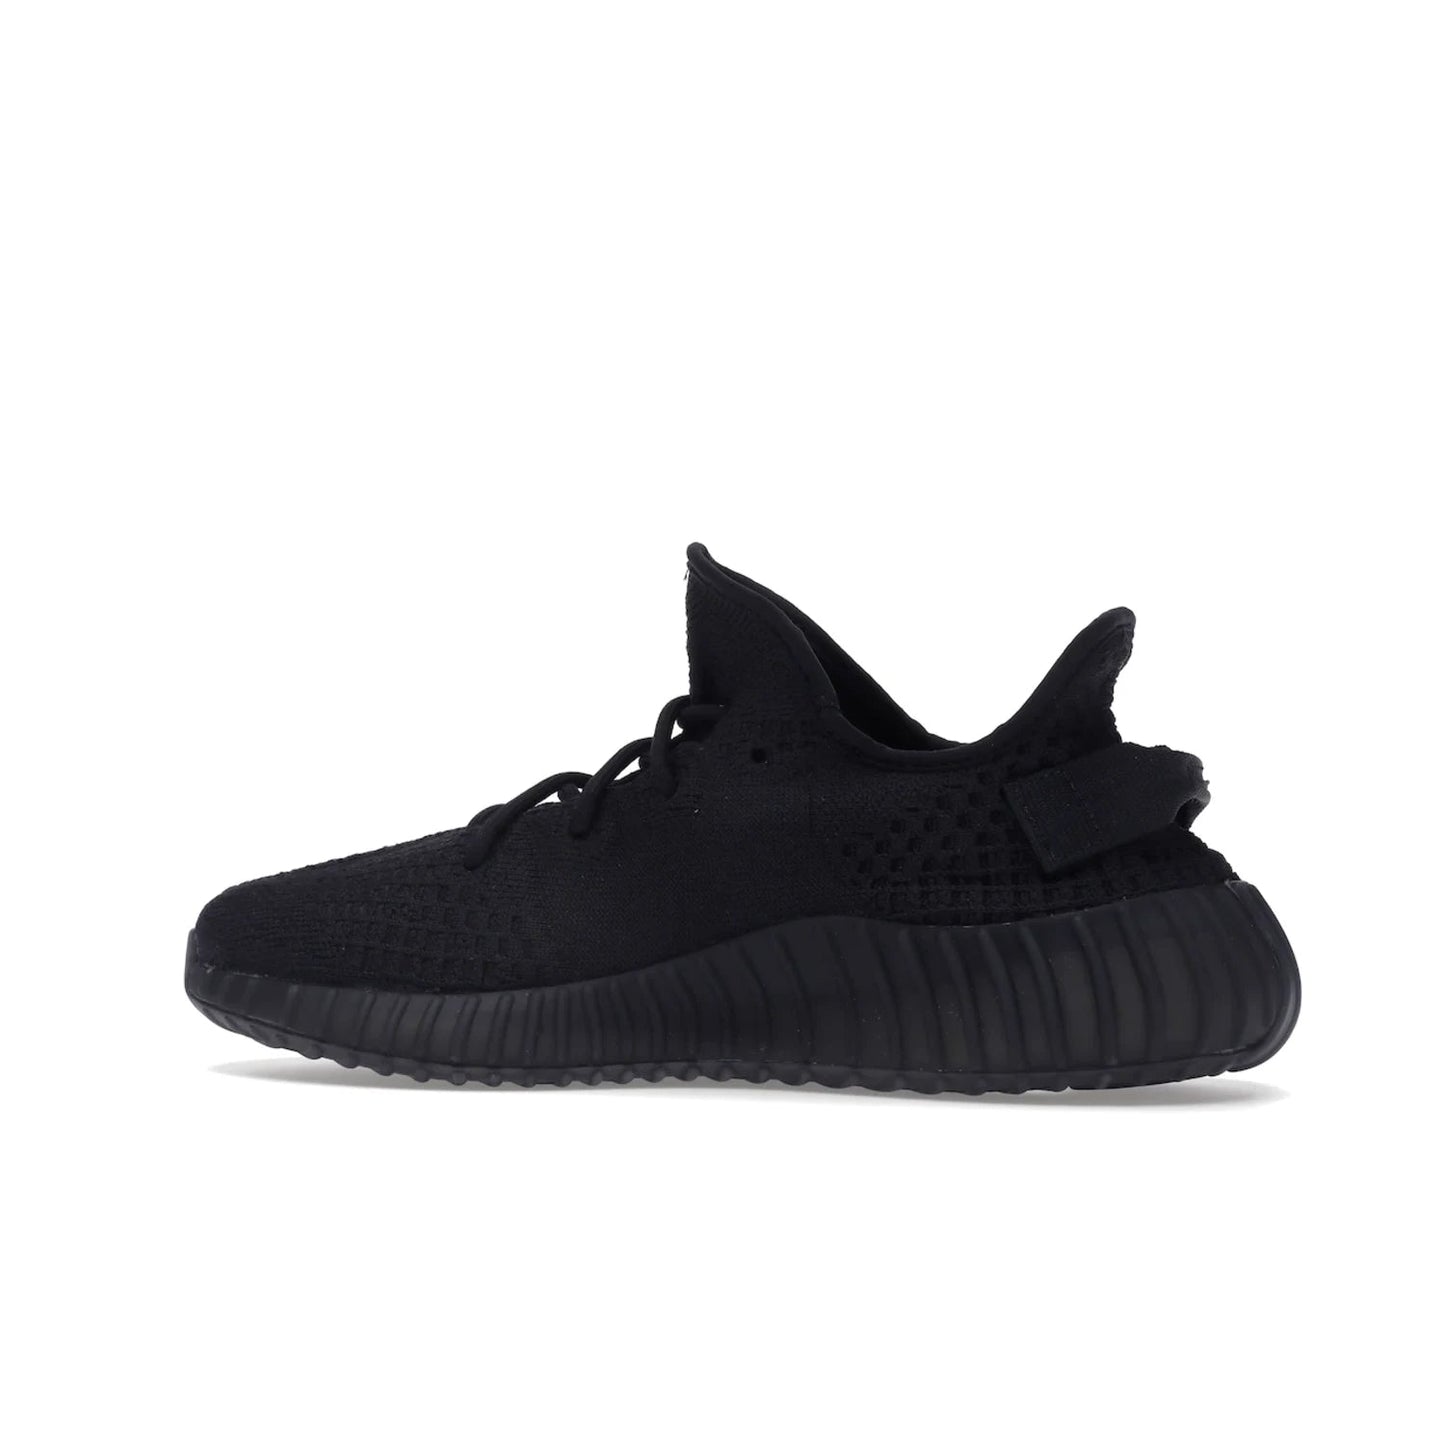 adidas Yeezy Boost 350 V2 Onyx - Image 21 - Only at www.BallersClubKickz.com - Adidas Yeezy Boost 350 V2 Onyx Triple Black shoes for comfort and style. Arriving Spring 2022.